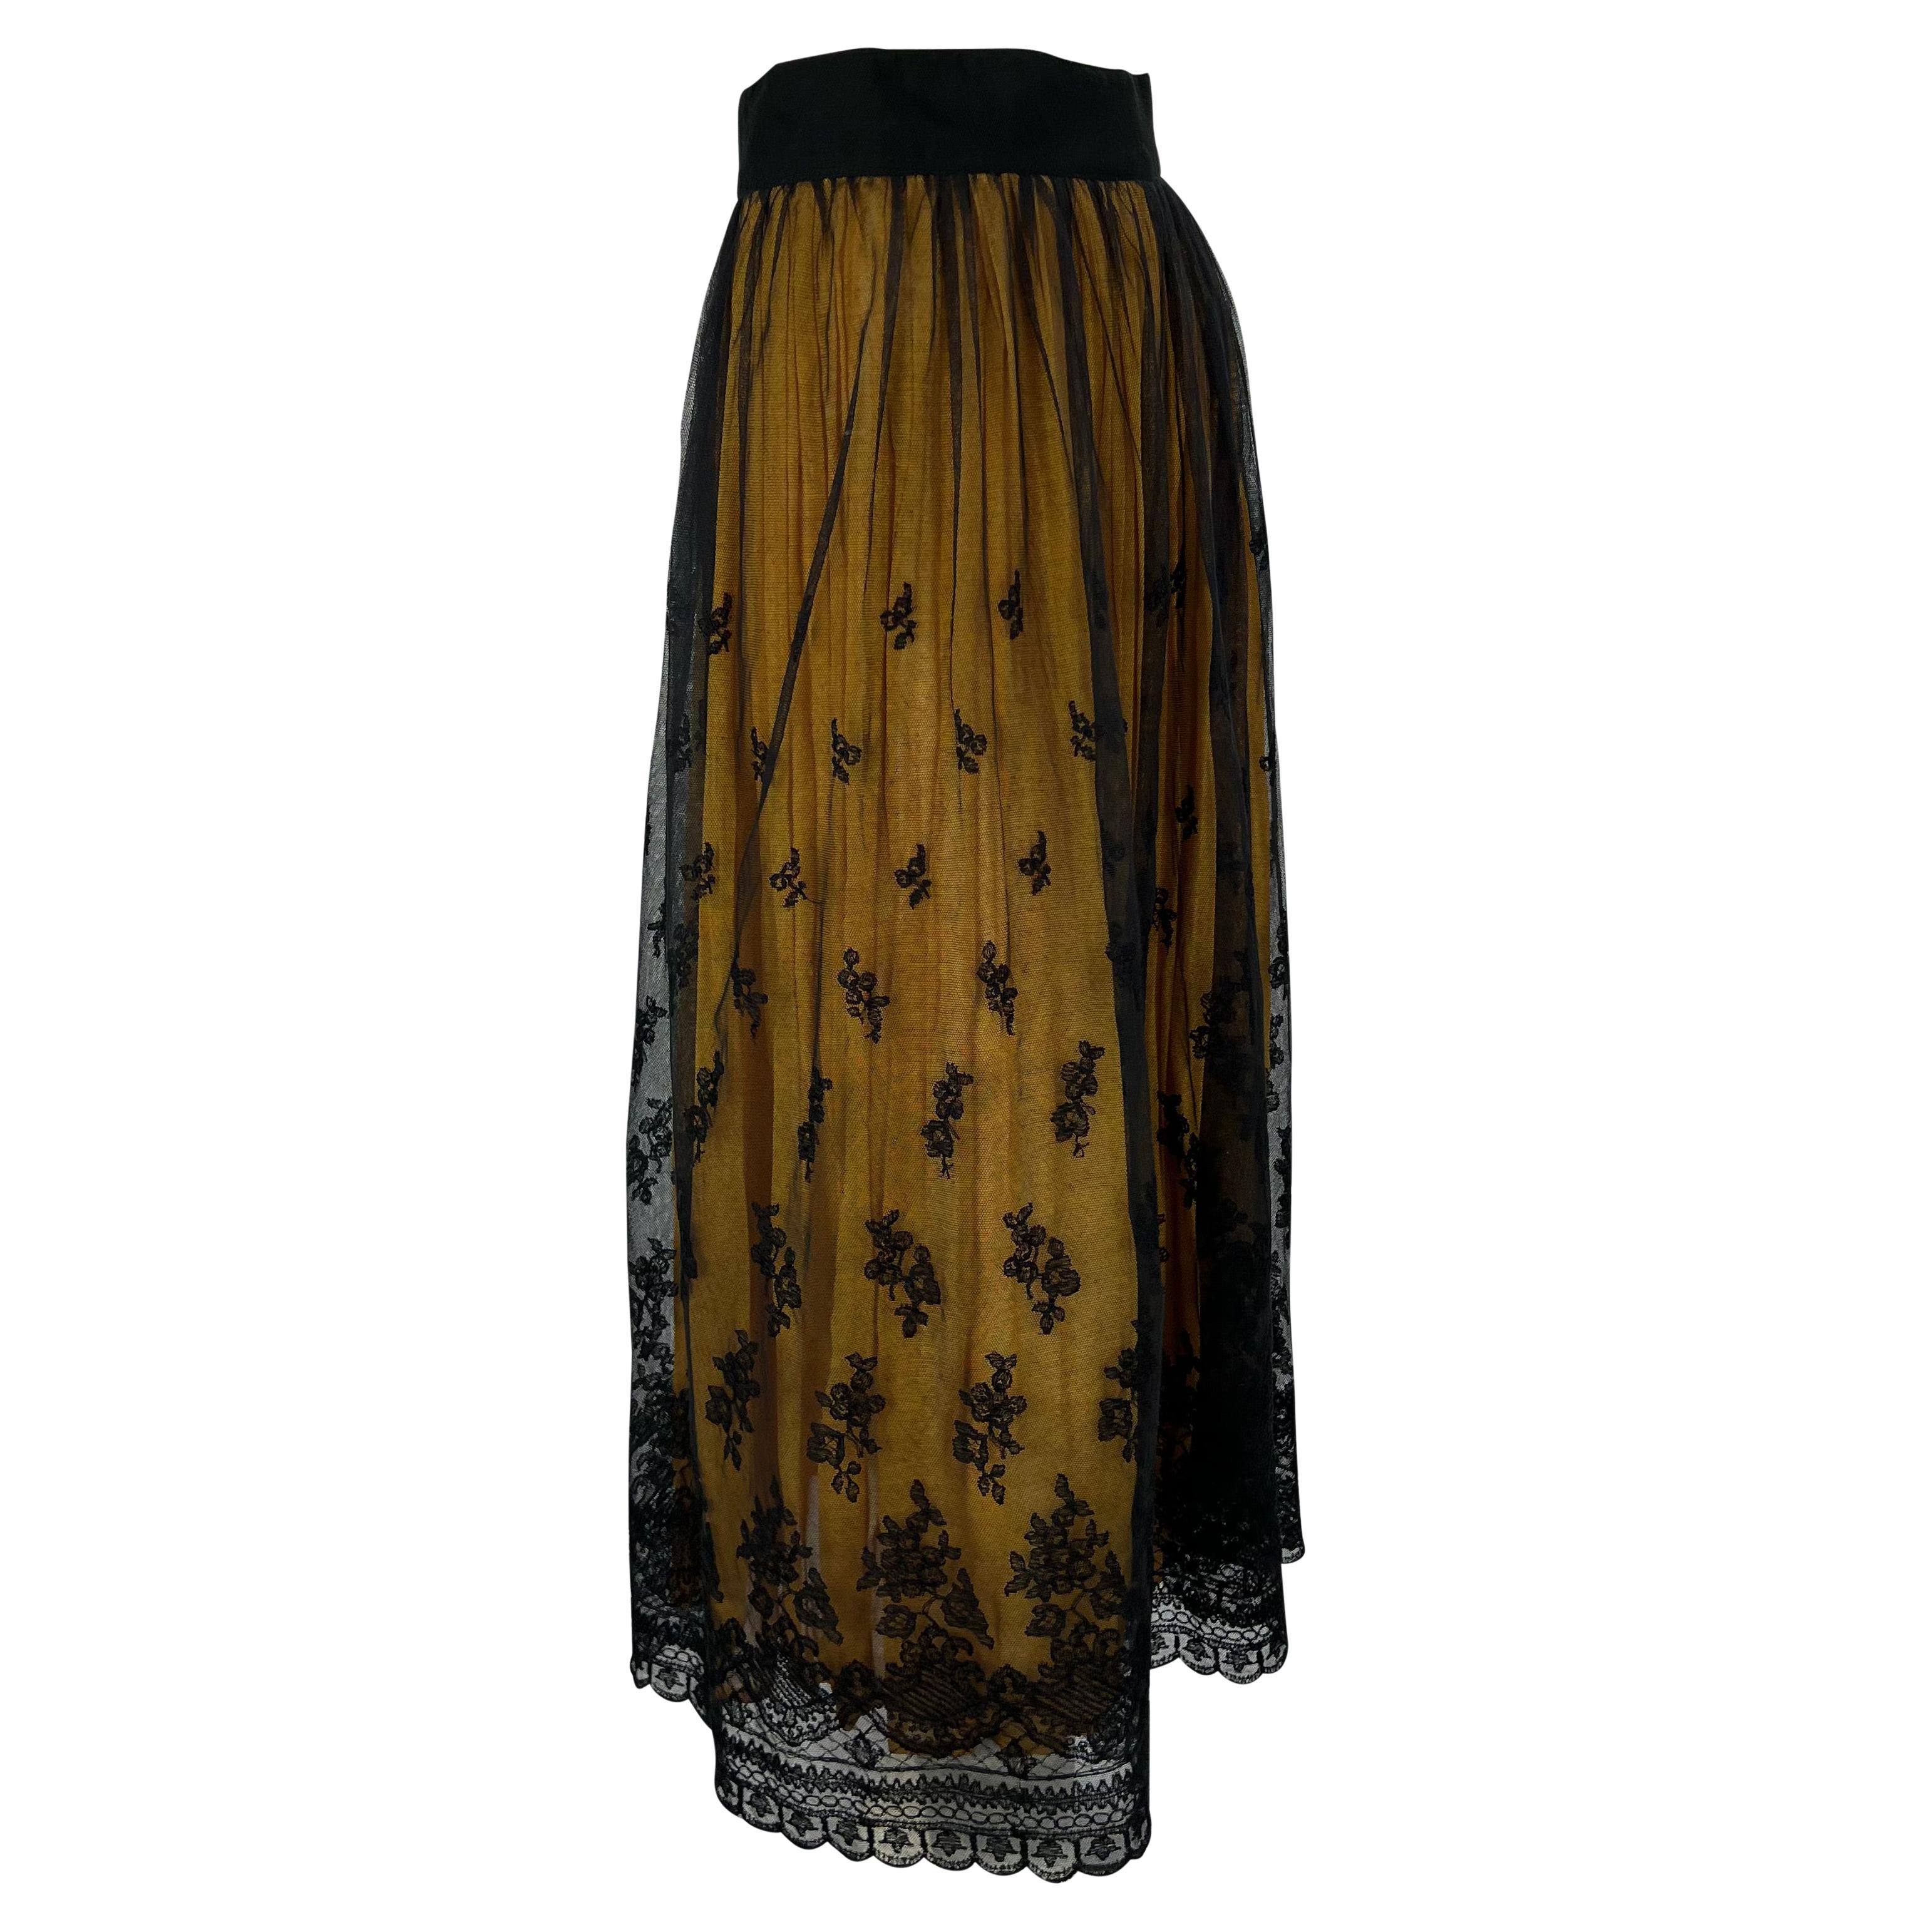 Women's 1990s Dolce & Gabbana Black Lace Overlay Yellow Sheer Flared Maxi Skirt For Sale